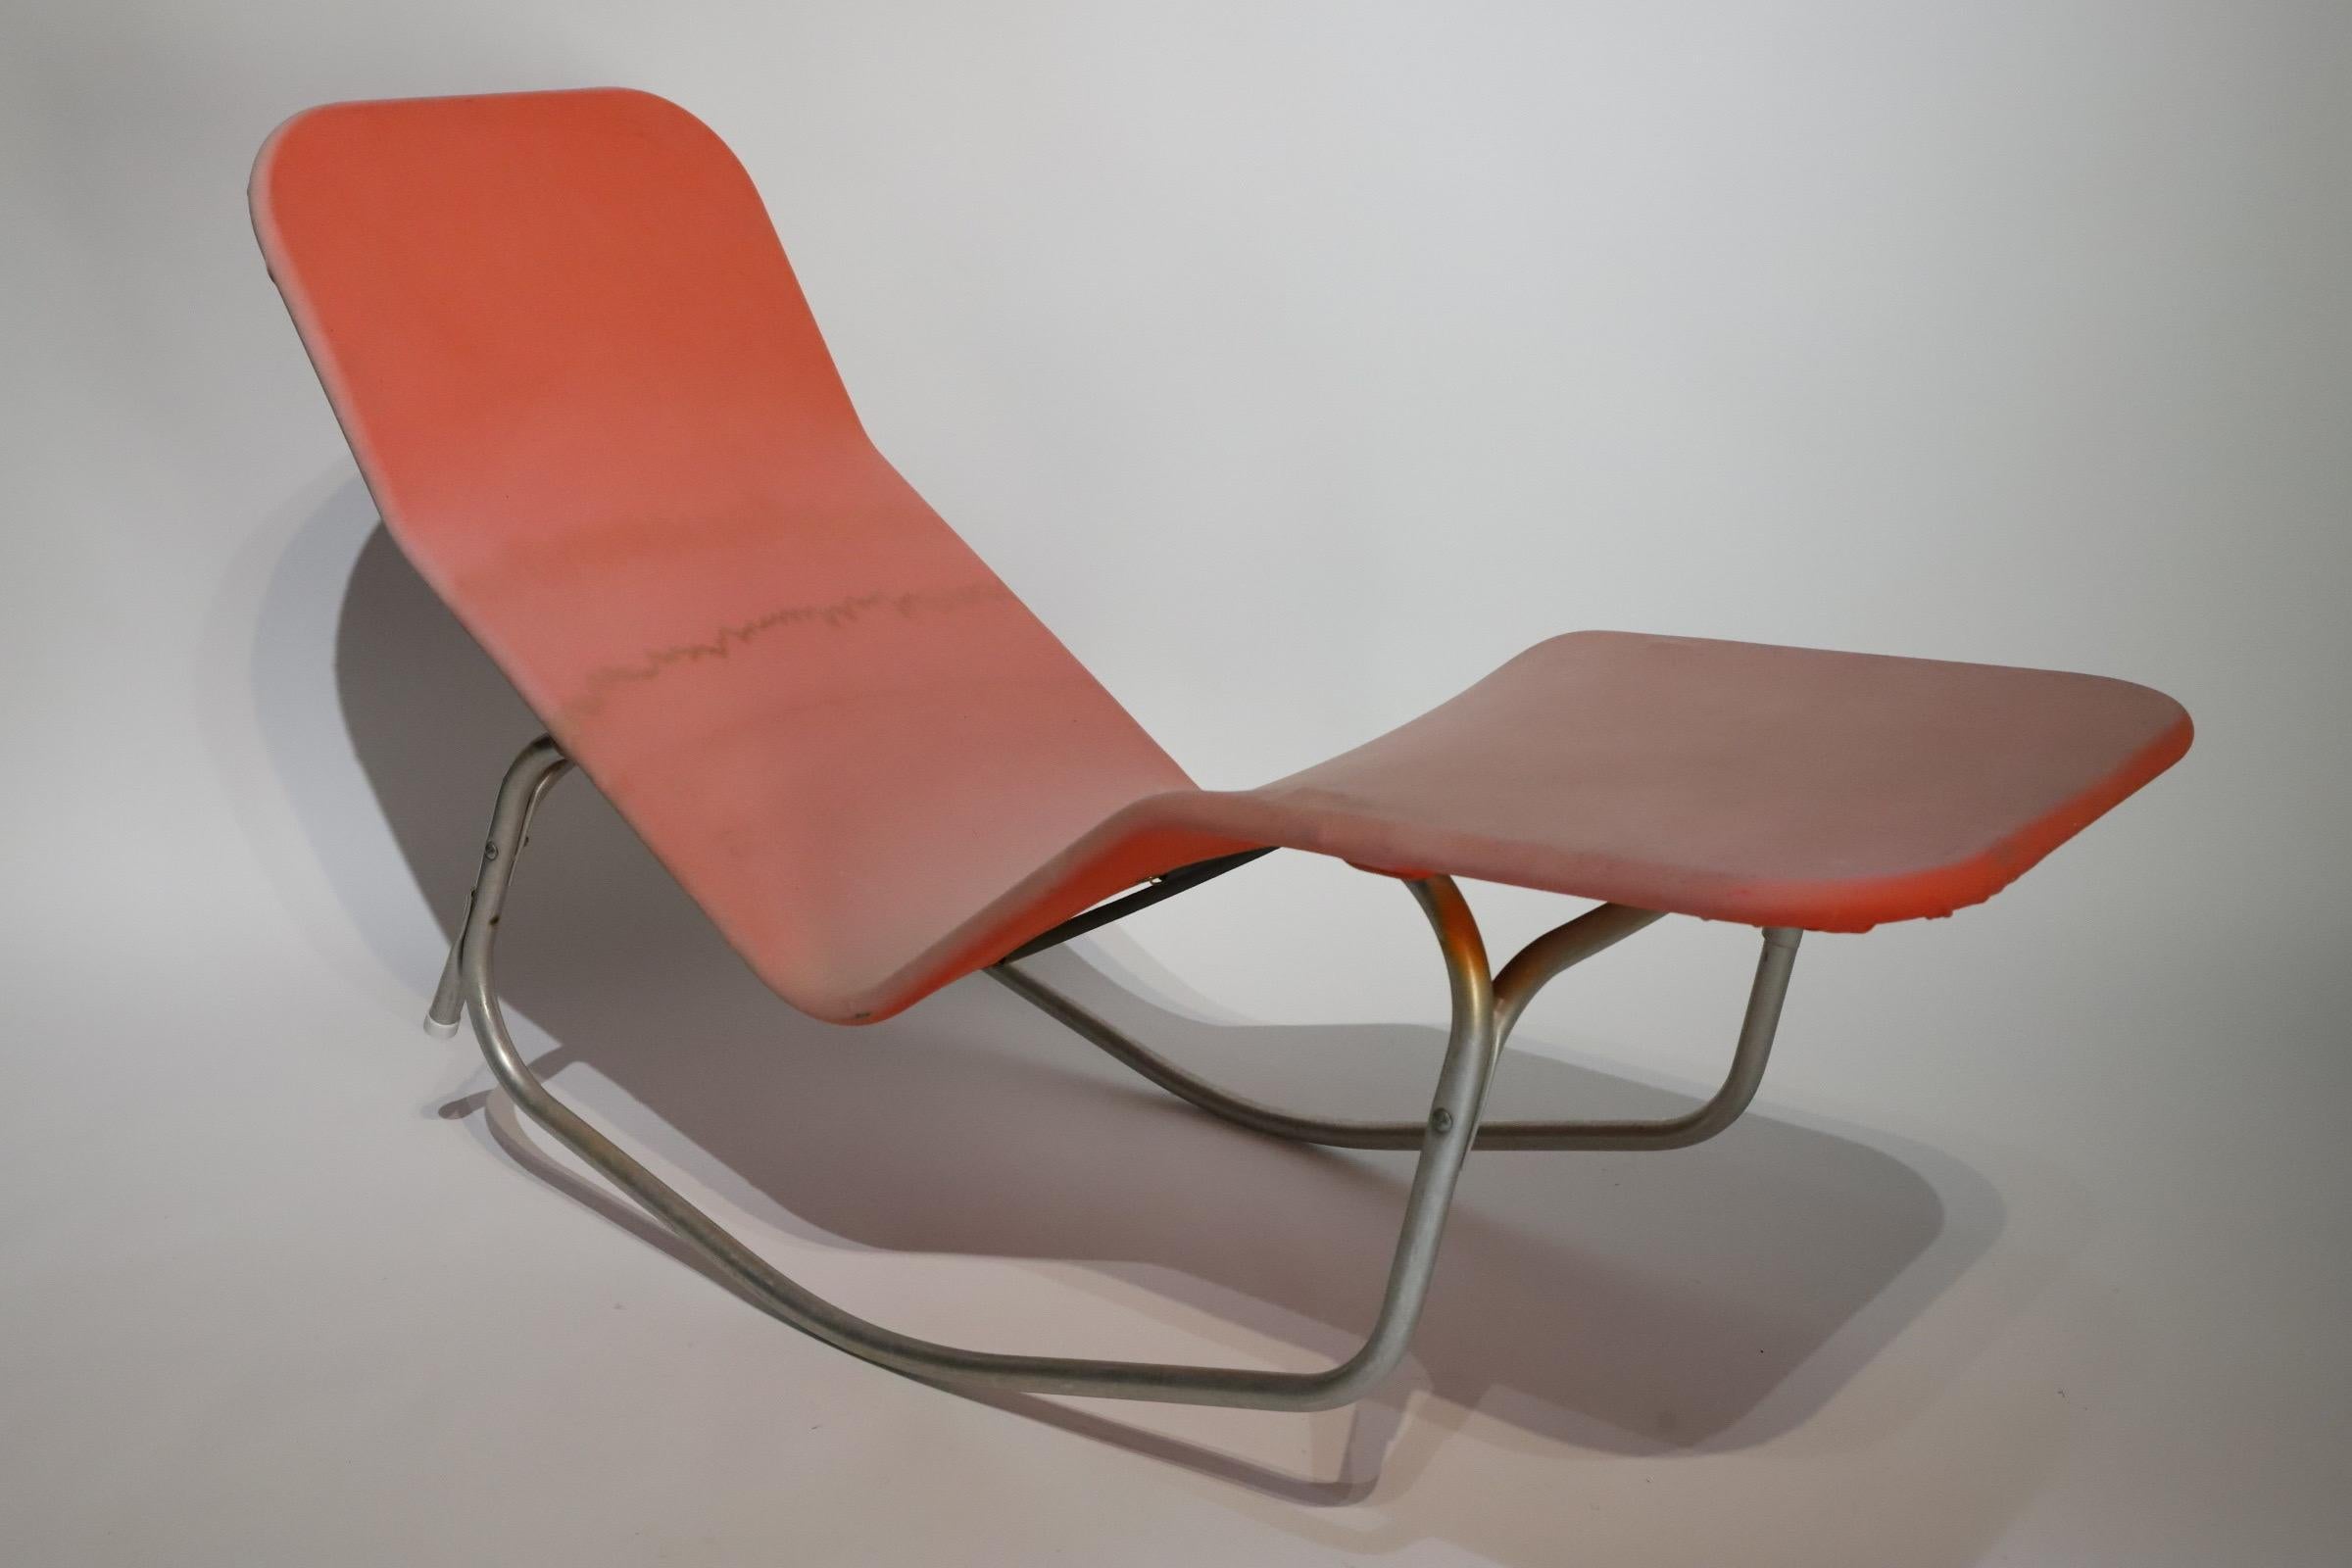 Barwa' lounge chair by Edgar Bartolucci for Barwa Associates. Sold with thought to be original sling. 

(New slings available online in a variety of colors).